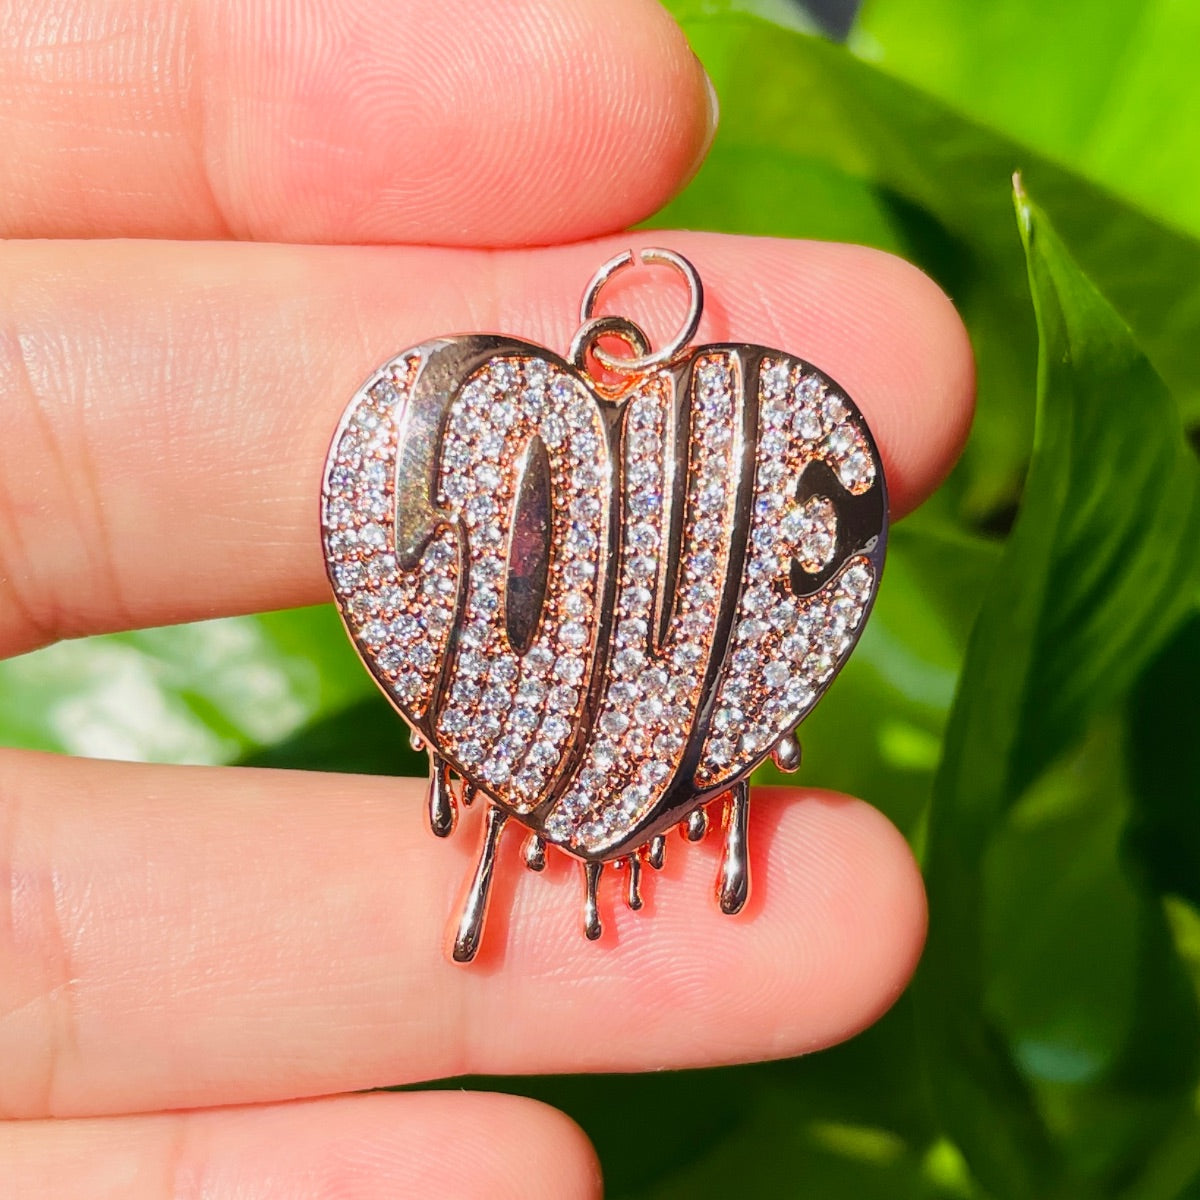 10pcs/lot CZ Paved Dripping Love Heart Charms Rose Gold CZ Paved Charms Hearts Love Letters New Charms Arrivals Charms Beads Beyond